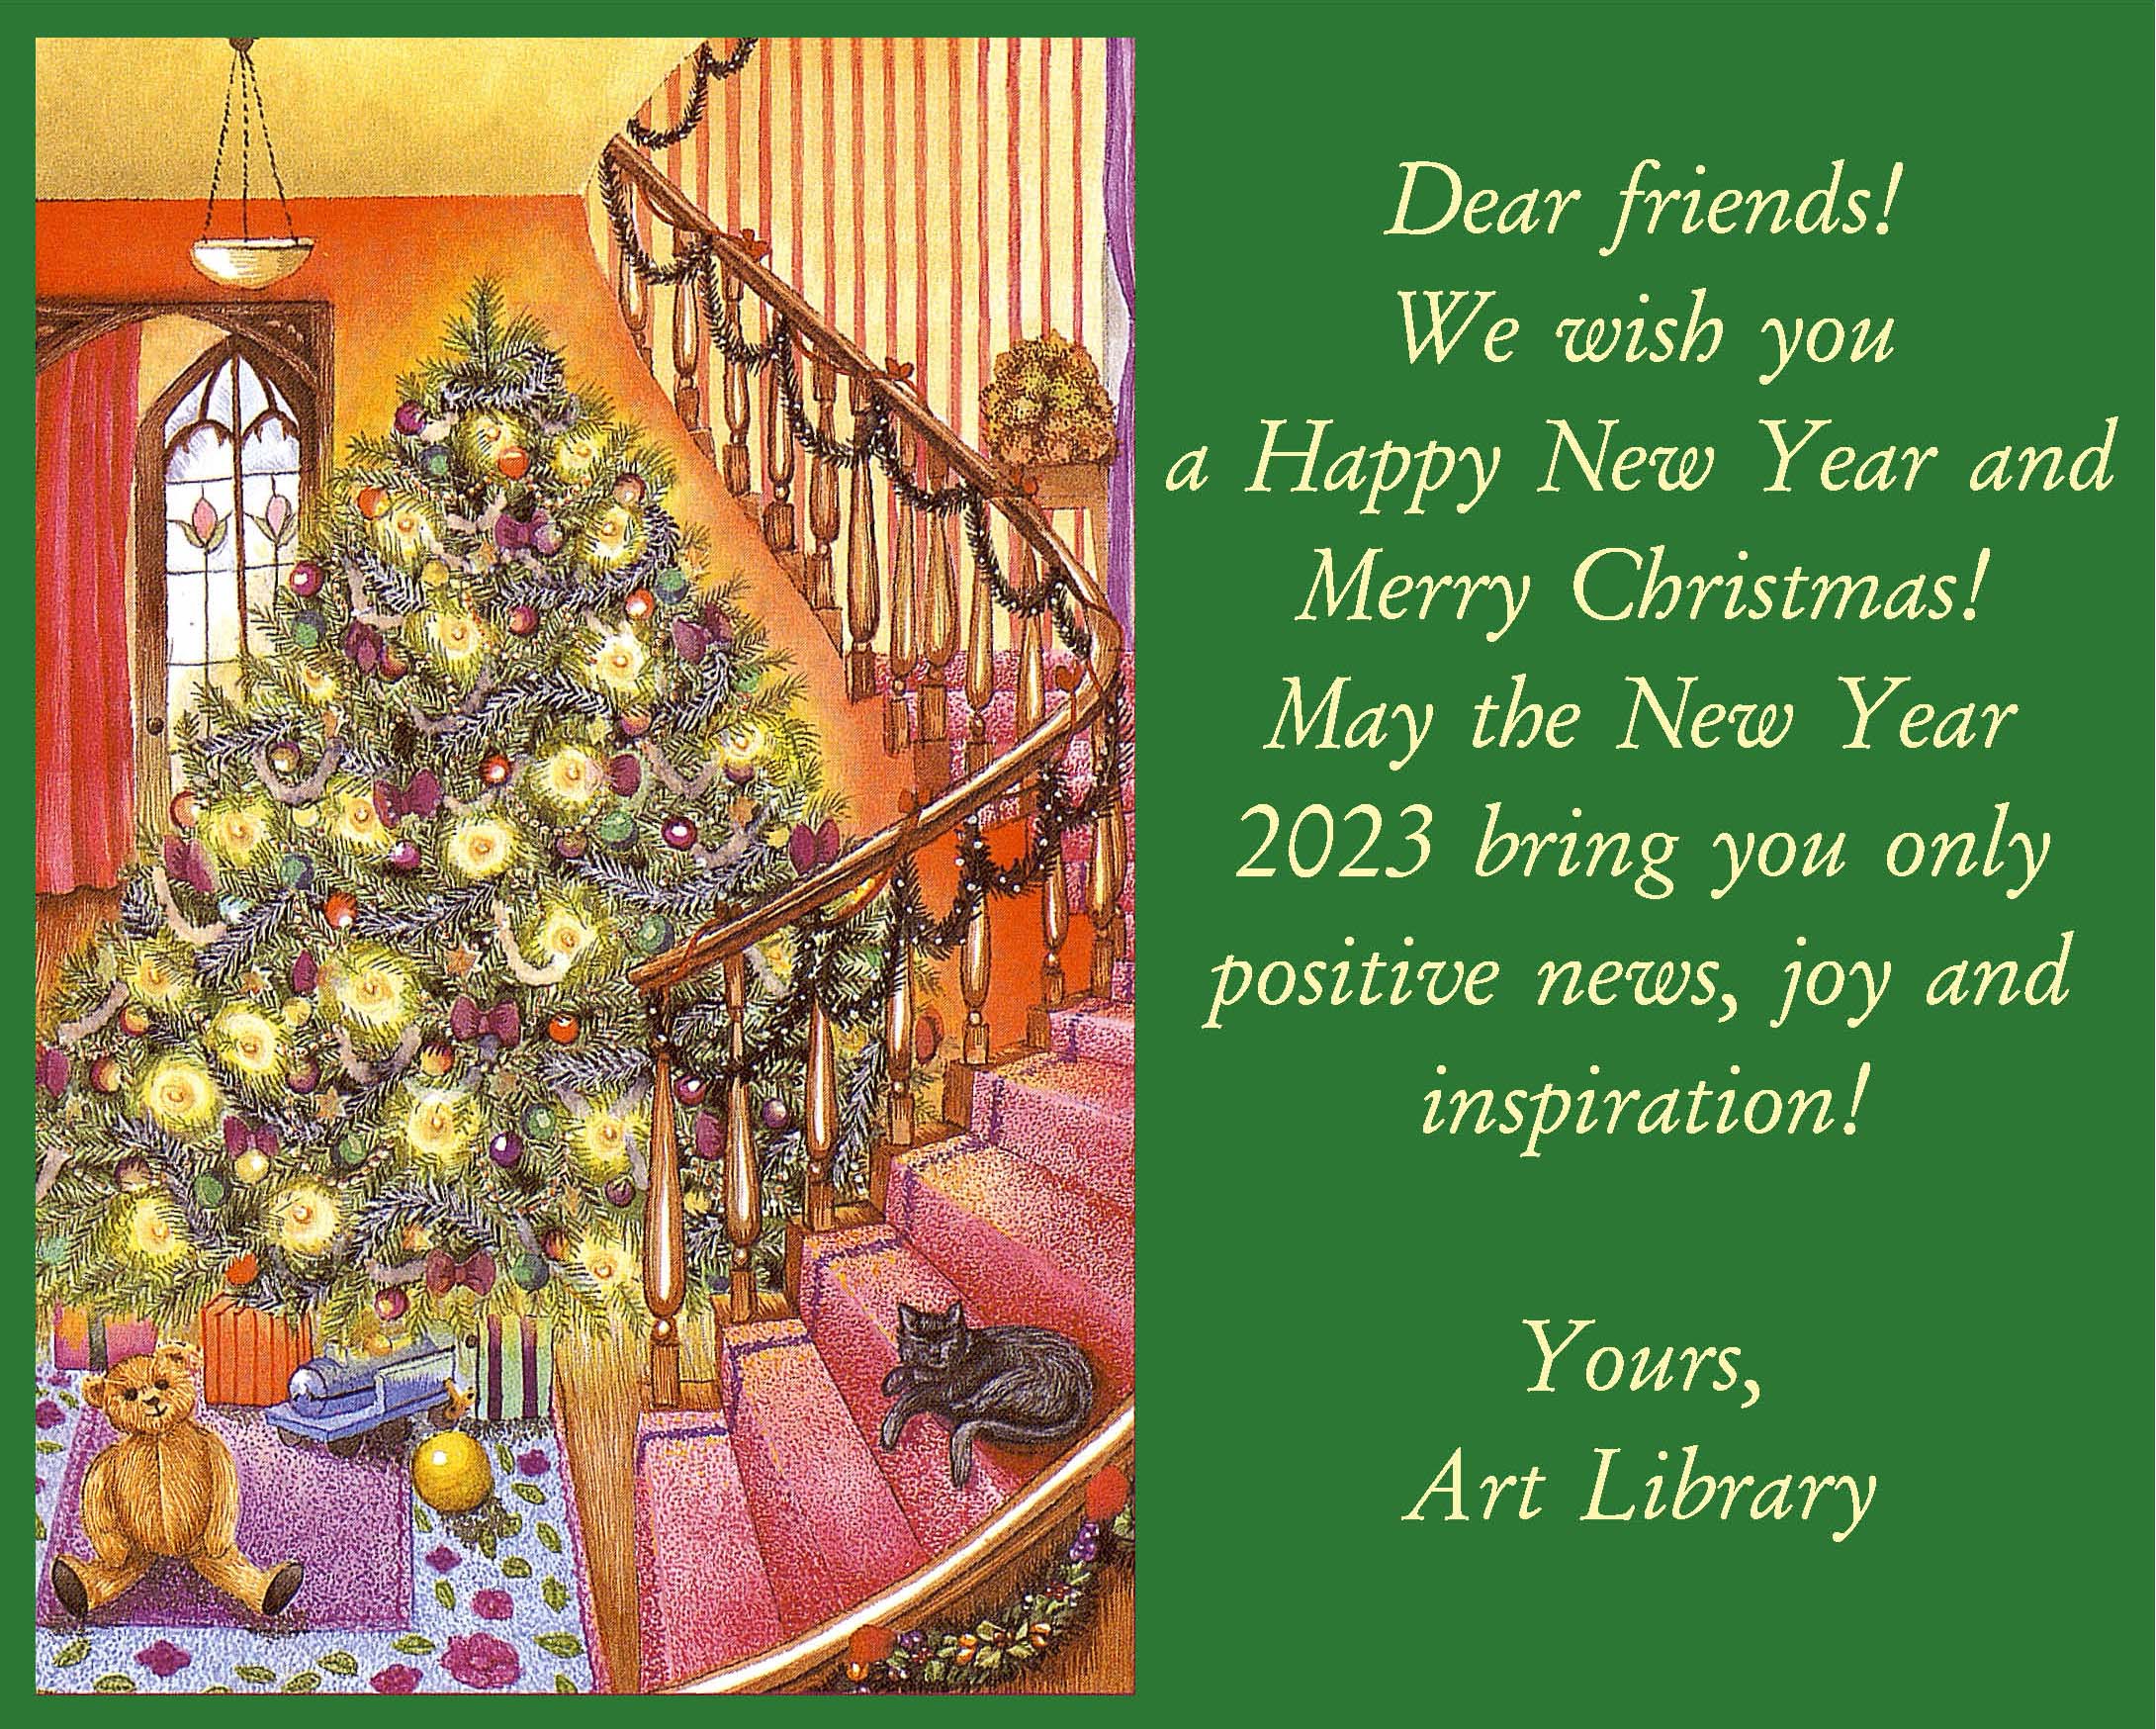 Dear friends!
We wish you a Happy New Year and Merry Christmas!  